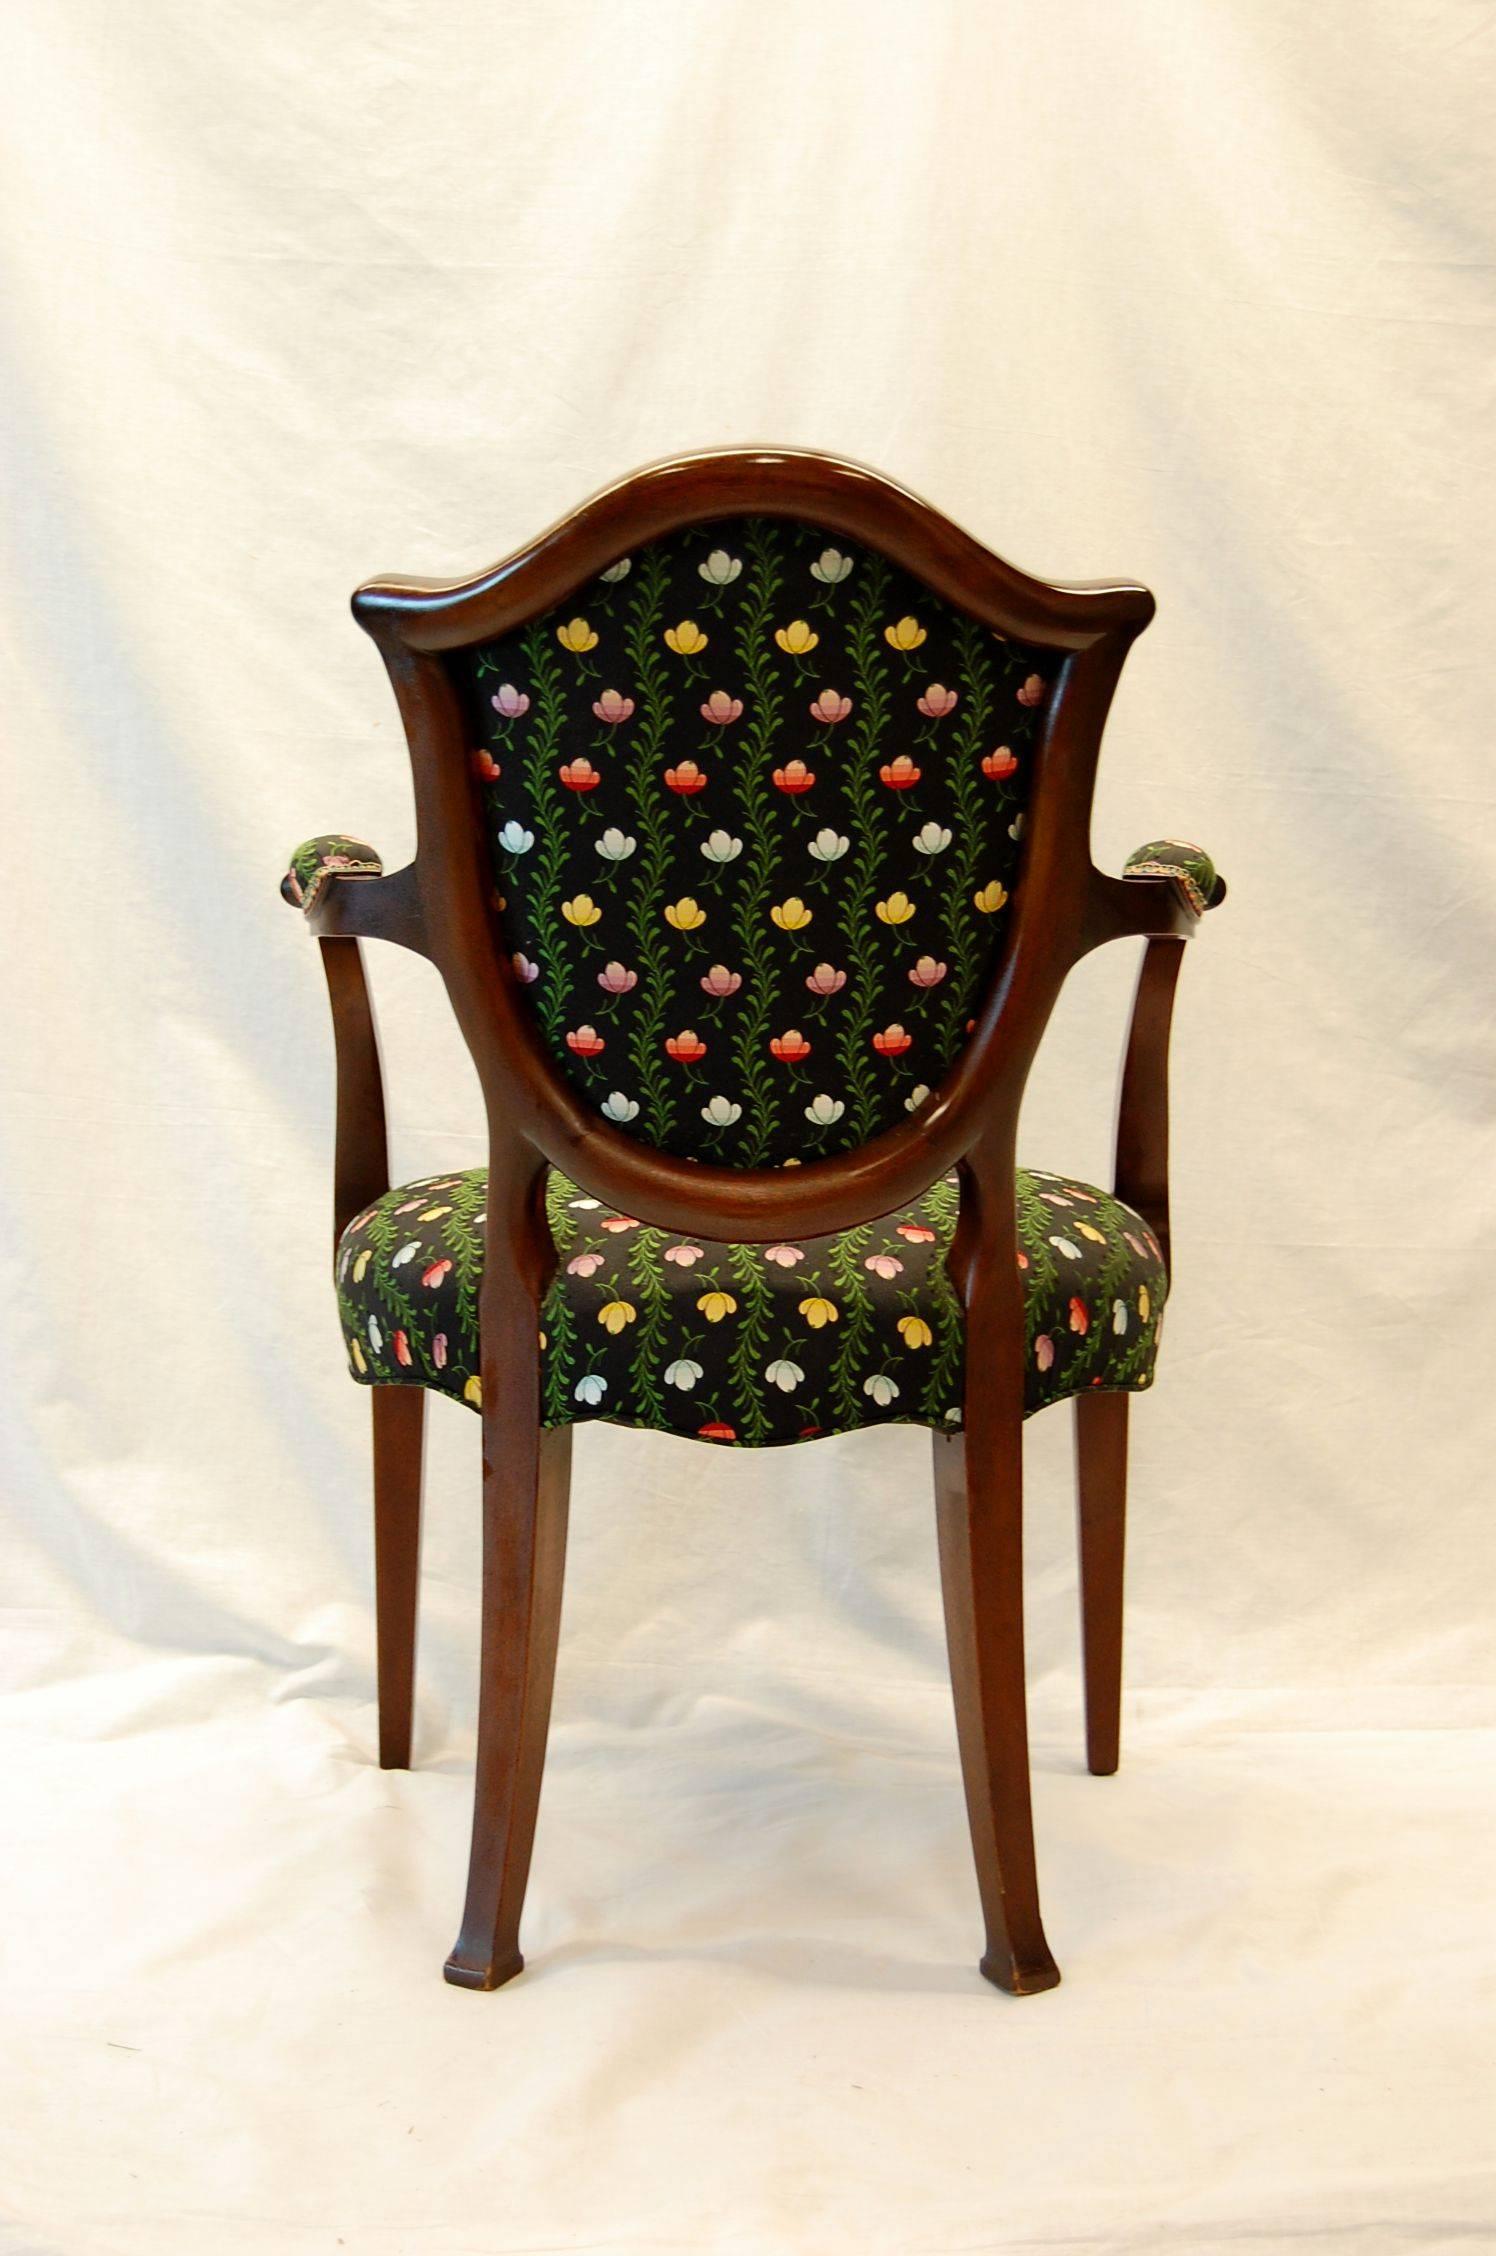 Hepplewhite Style Mahogany Open-Arm Chair Covered in Silk Brocade In Excellent Condition For Sale In Pittsburgh, PA